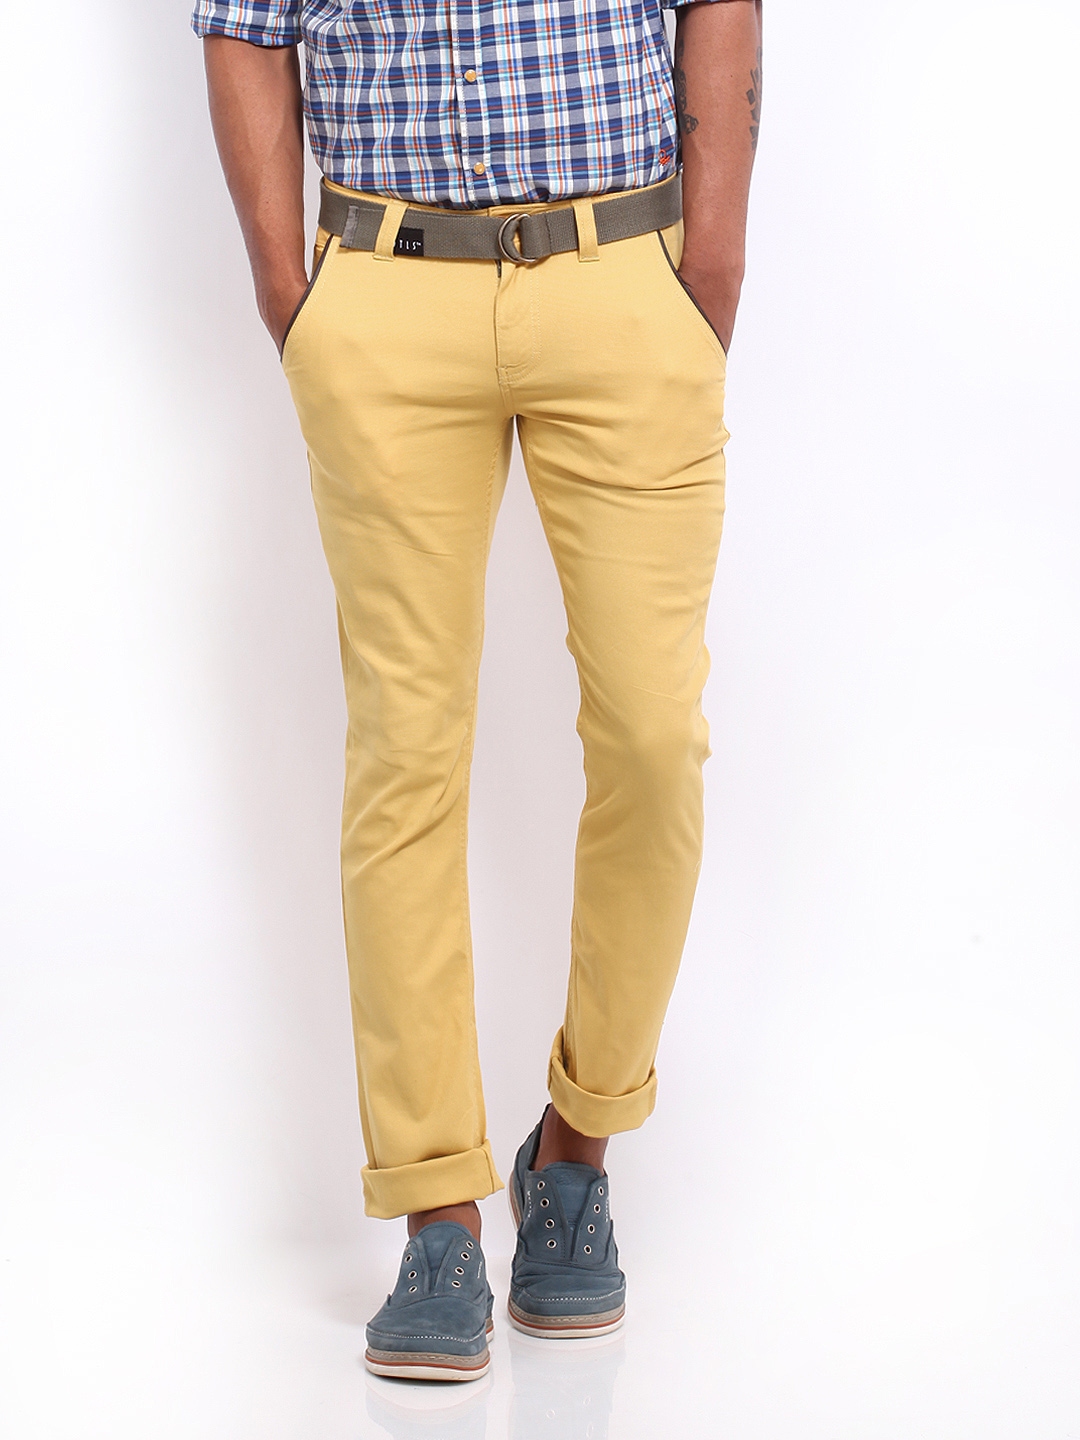 Buy United Colors Of Benetton Men Mustard Yellow Slim Fit Chino Trousers   Trousers for Men 283426  Myntra